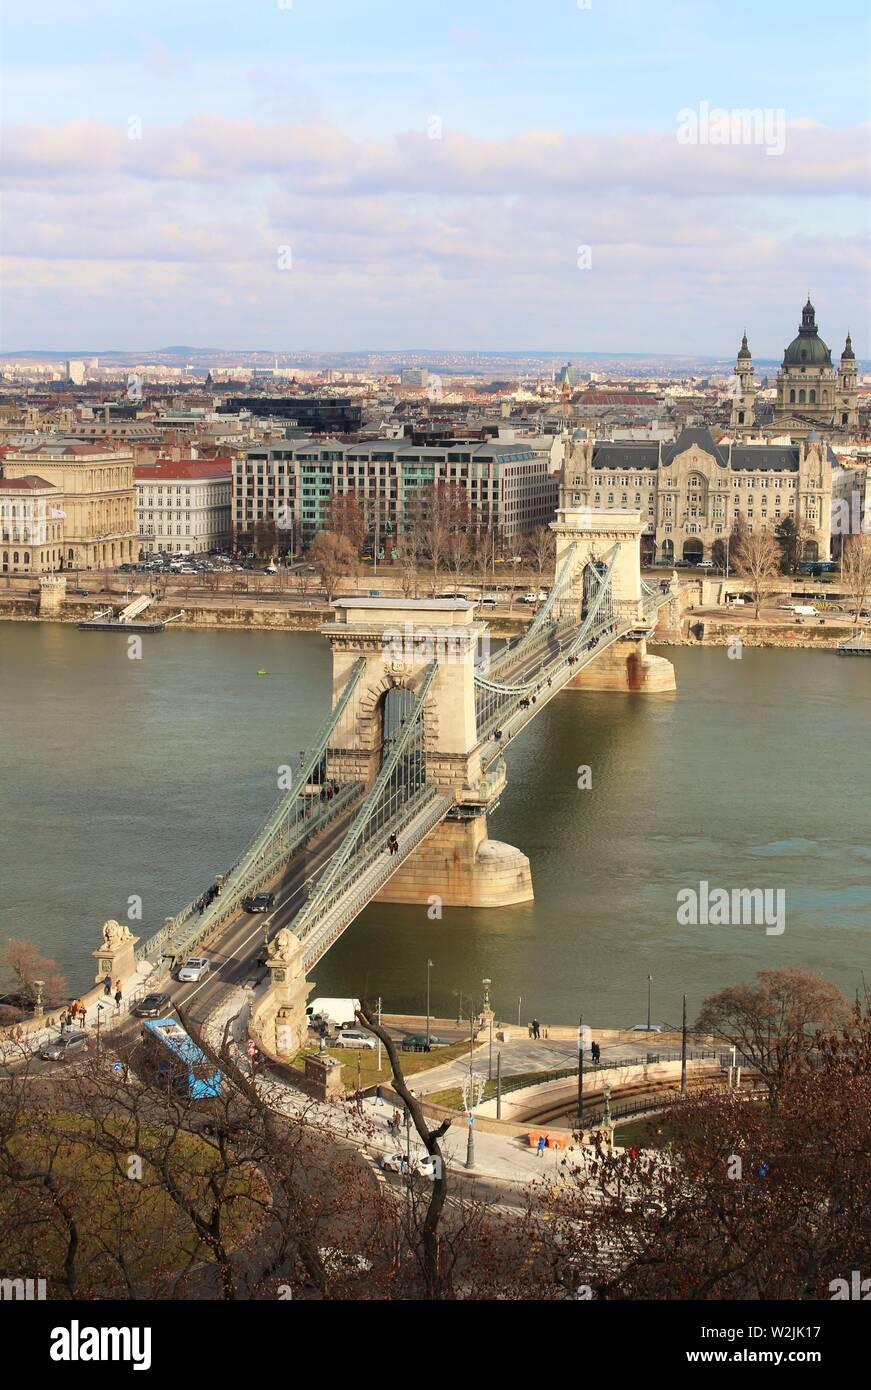 Aerial view of Budapest's 'Chain Bridge', which was the first bridge built across the Danube river, to provide a physical link between Buda and Pest. Stock Photo